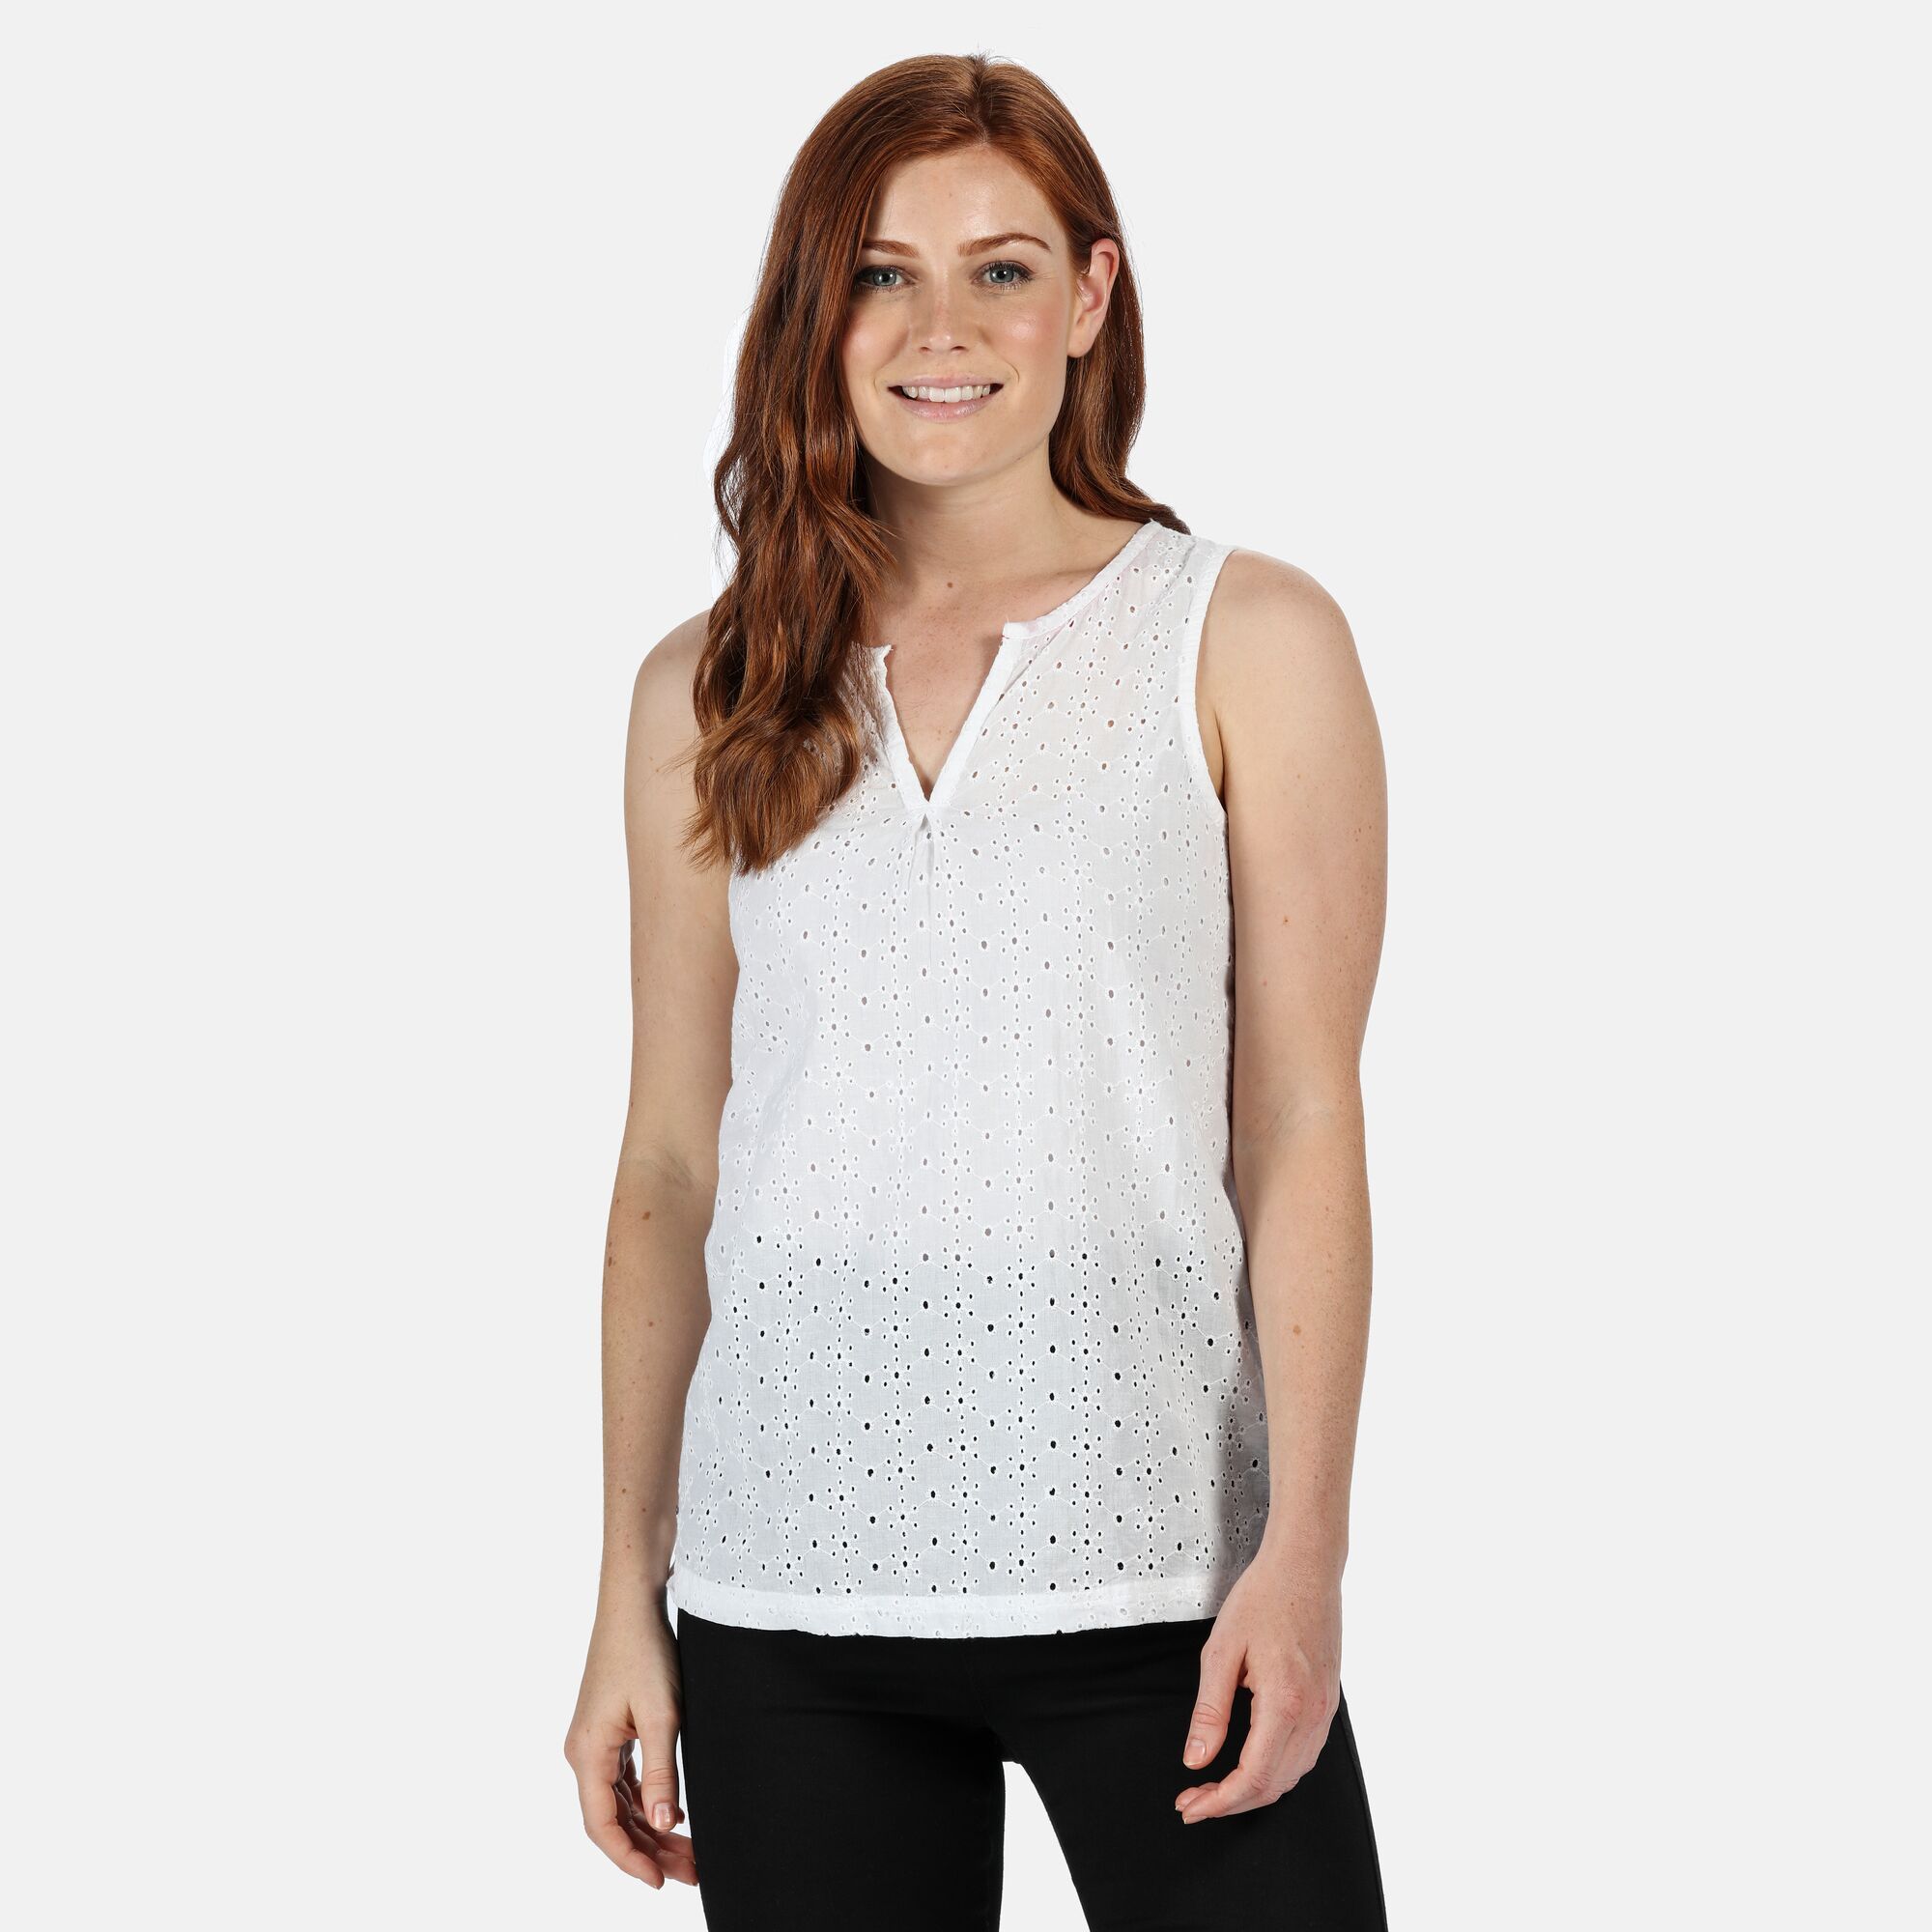 Material: 100% organic cotton. Small v insert to neckline. Side vents.